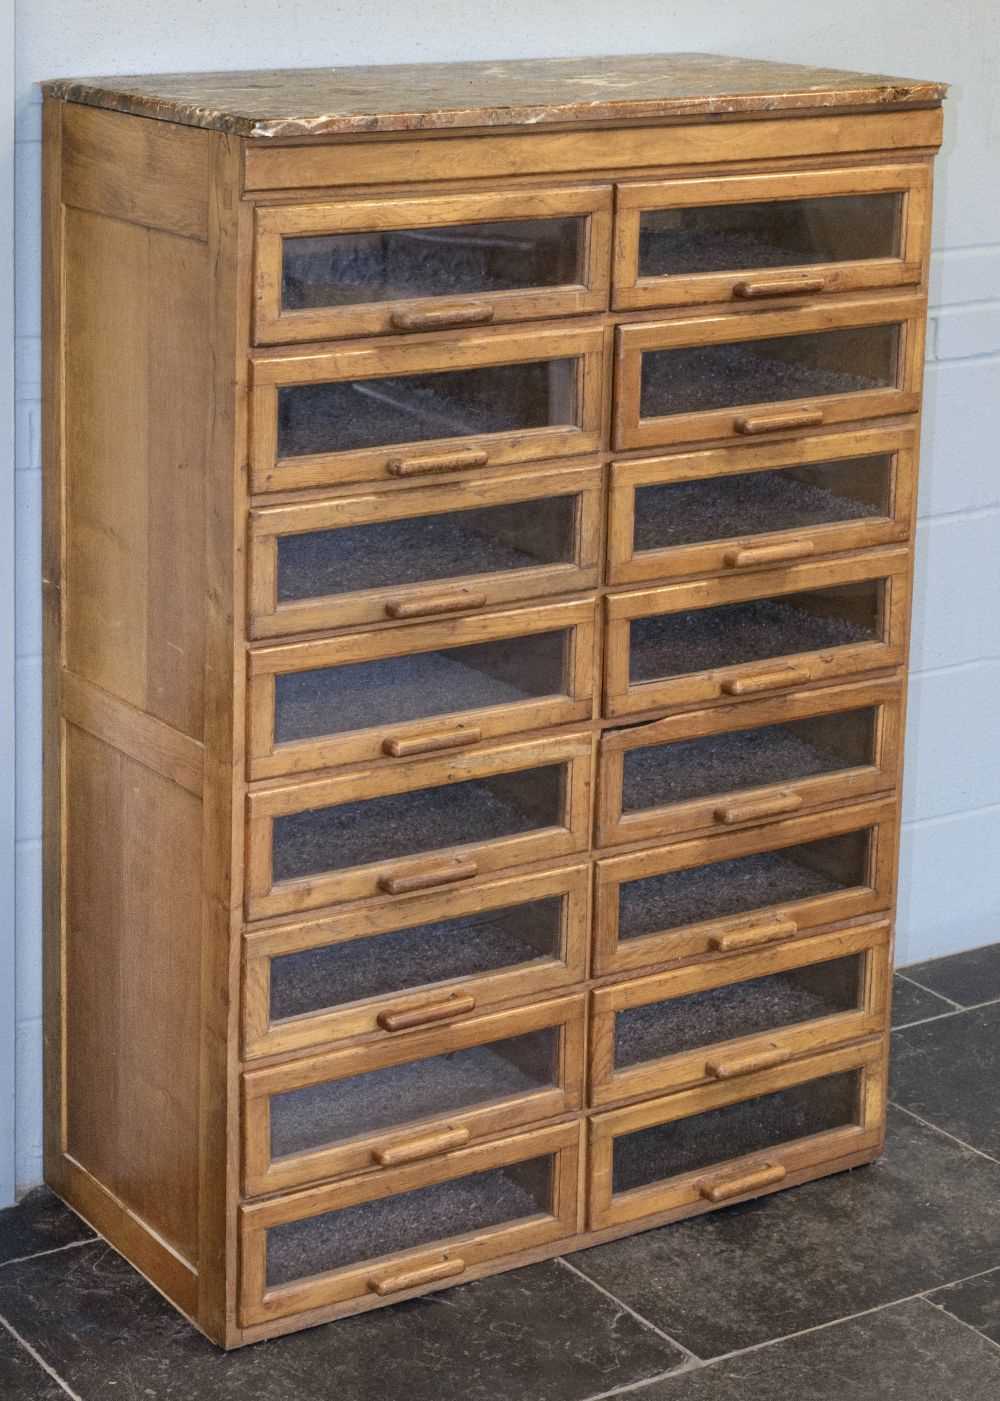 Lot 194 - Shop Cabinet. An early 20th century oak haberdashery bank of 16 drawers